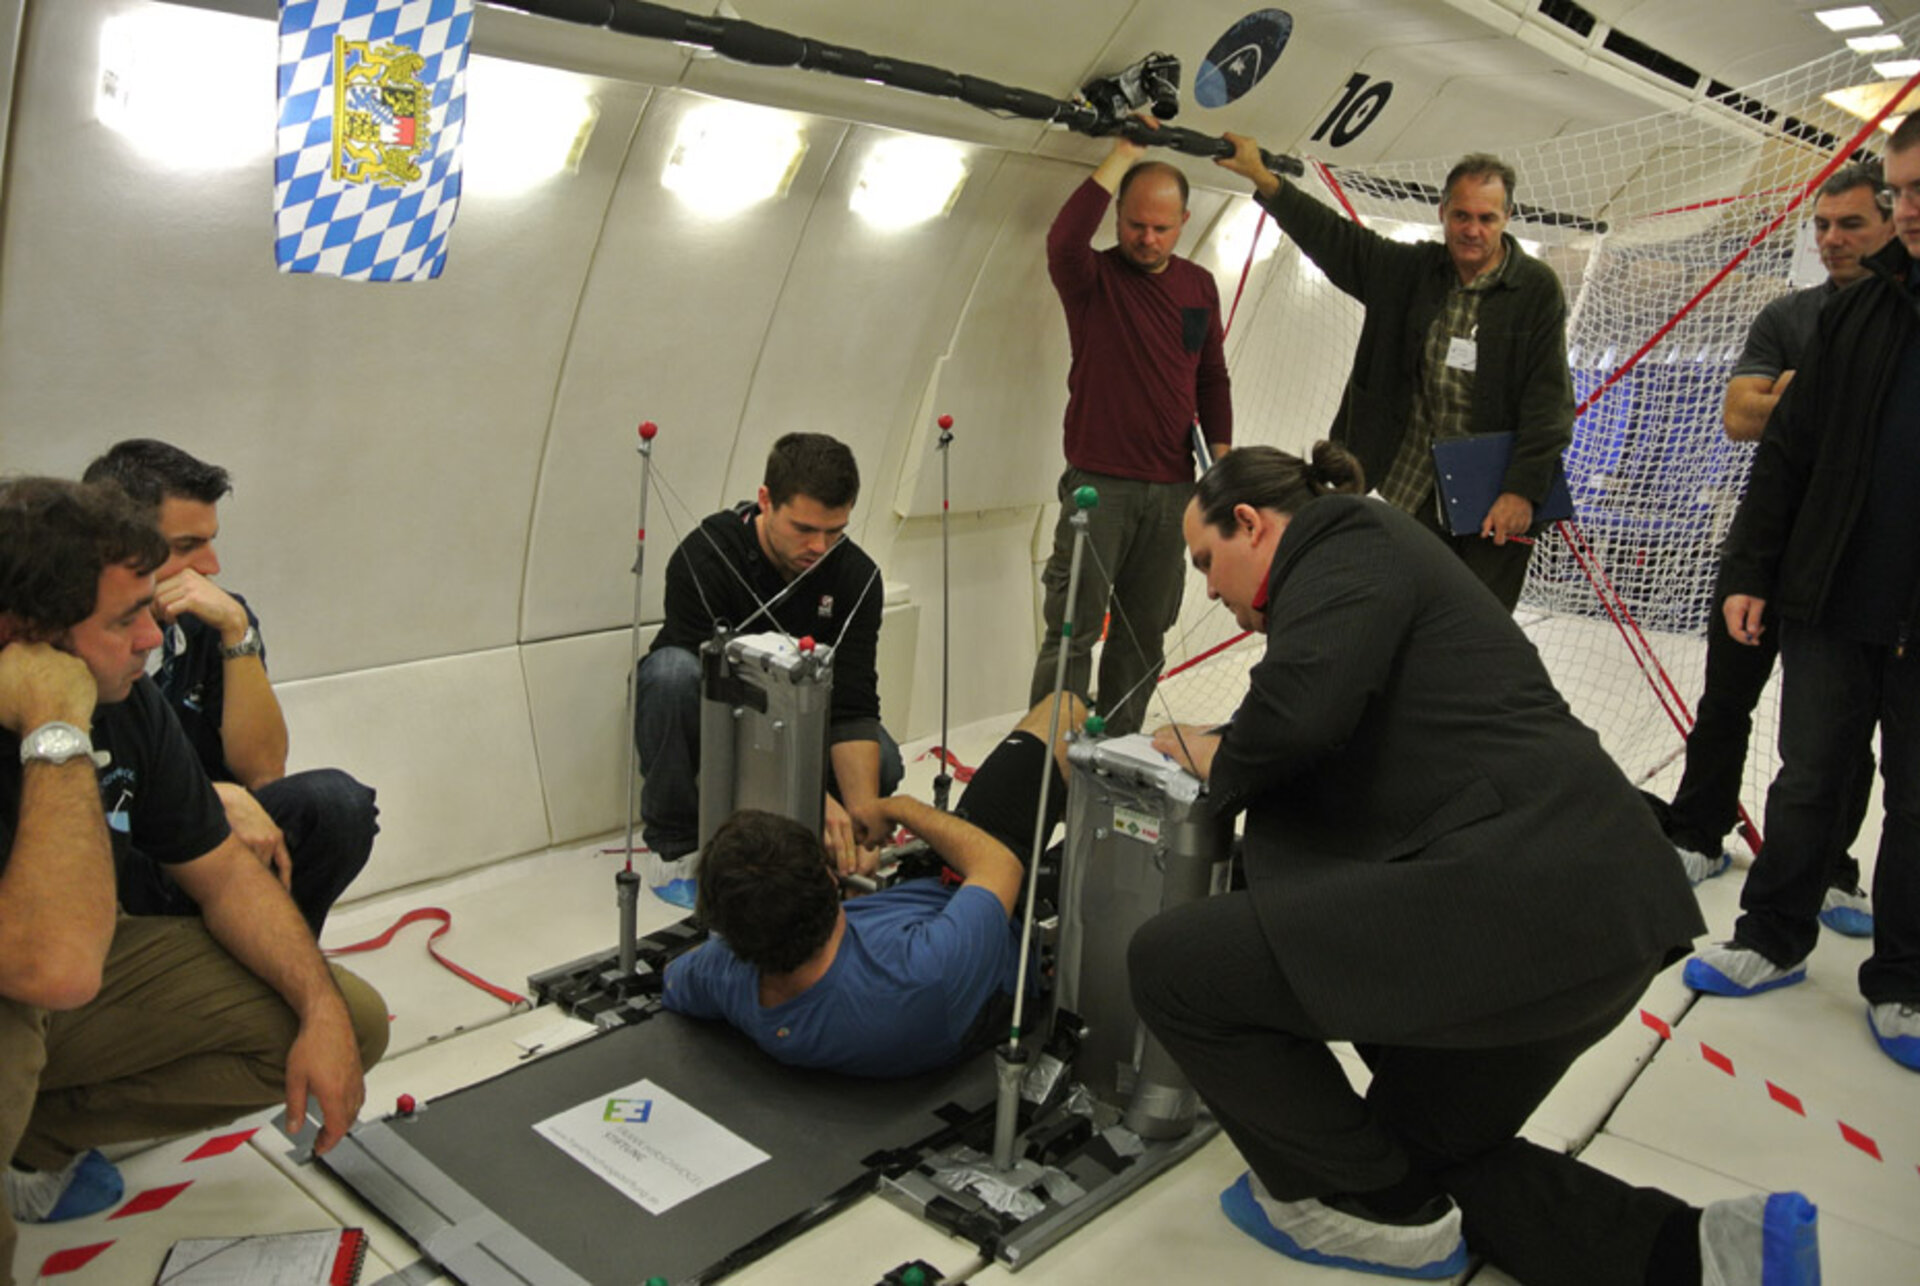 Safety review for the Hydronauts 2Fly team.